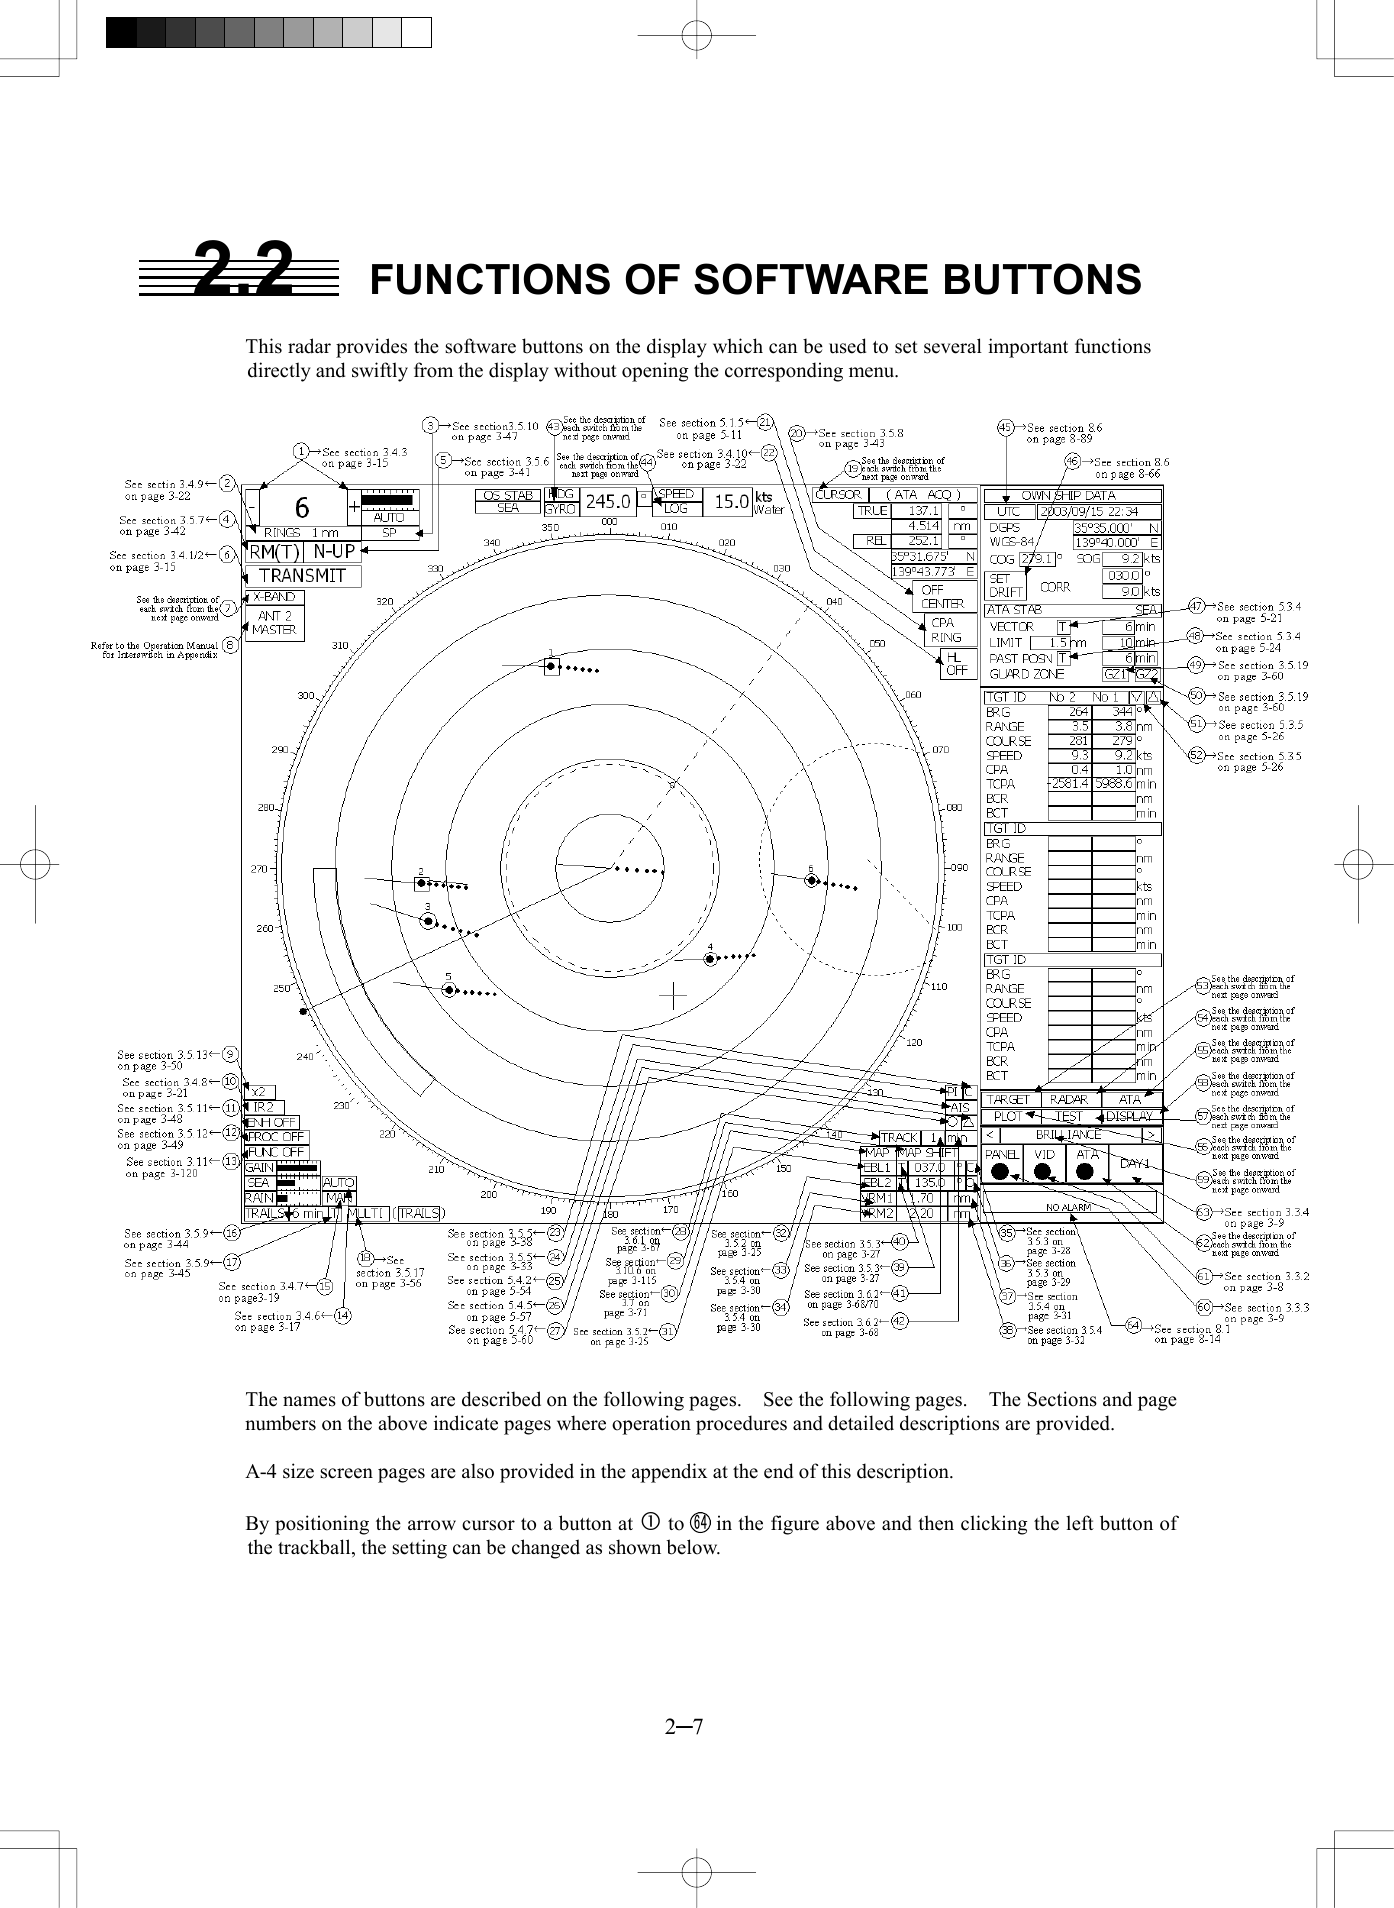  2─7 2.2  FUNCTIONS OF SOFTWARE BUTTONS  This radar provides the software buttons on the display which can be used to set several important functions directly and swiftly from the display without opening the corresponding menu.                                           The names of buttons are described on the following pages.    See the following pages.    The Sections and page numbers on the above indicate pages where operation procedures and detailed descriptions are provided.  A-4 size screen pages are also provided in the appendix at the end of this description.  By positioning the arrow cursor to a button at  to      in the figure above and then clicking the left button of the trackball, the setting can be changed as shown below. 64